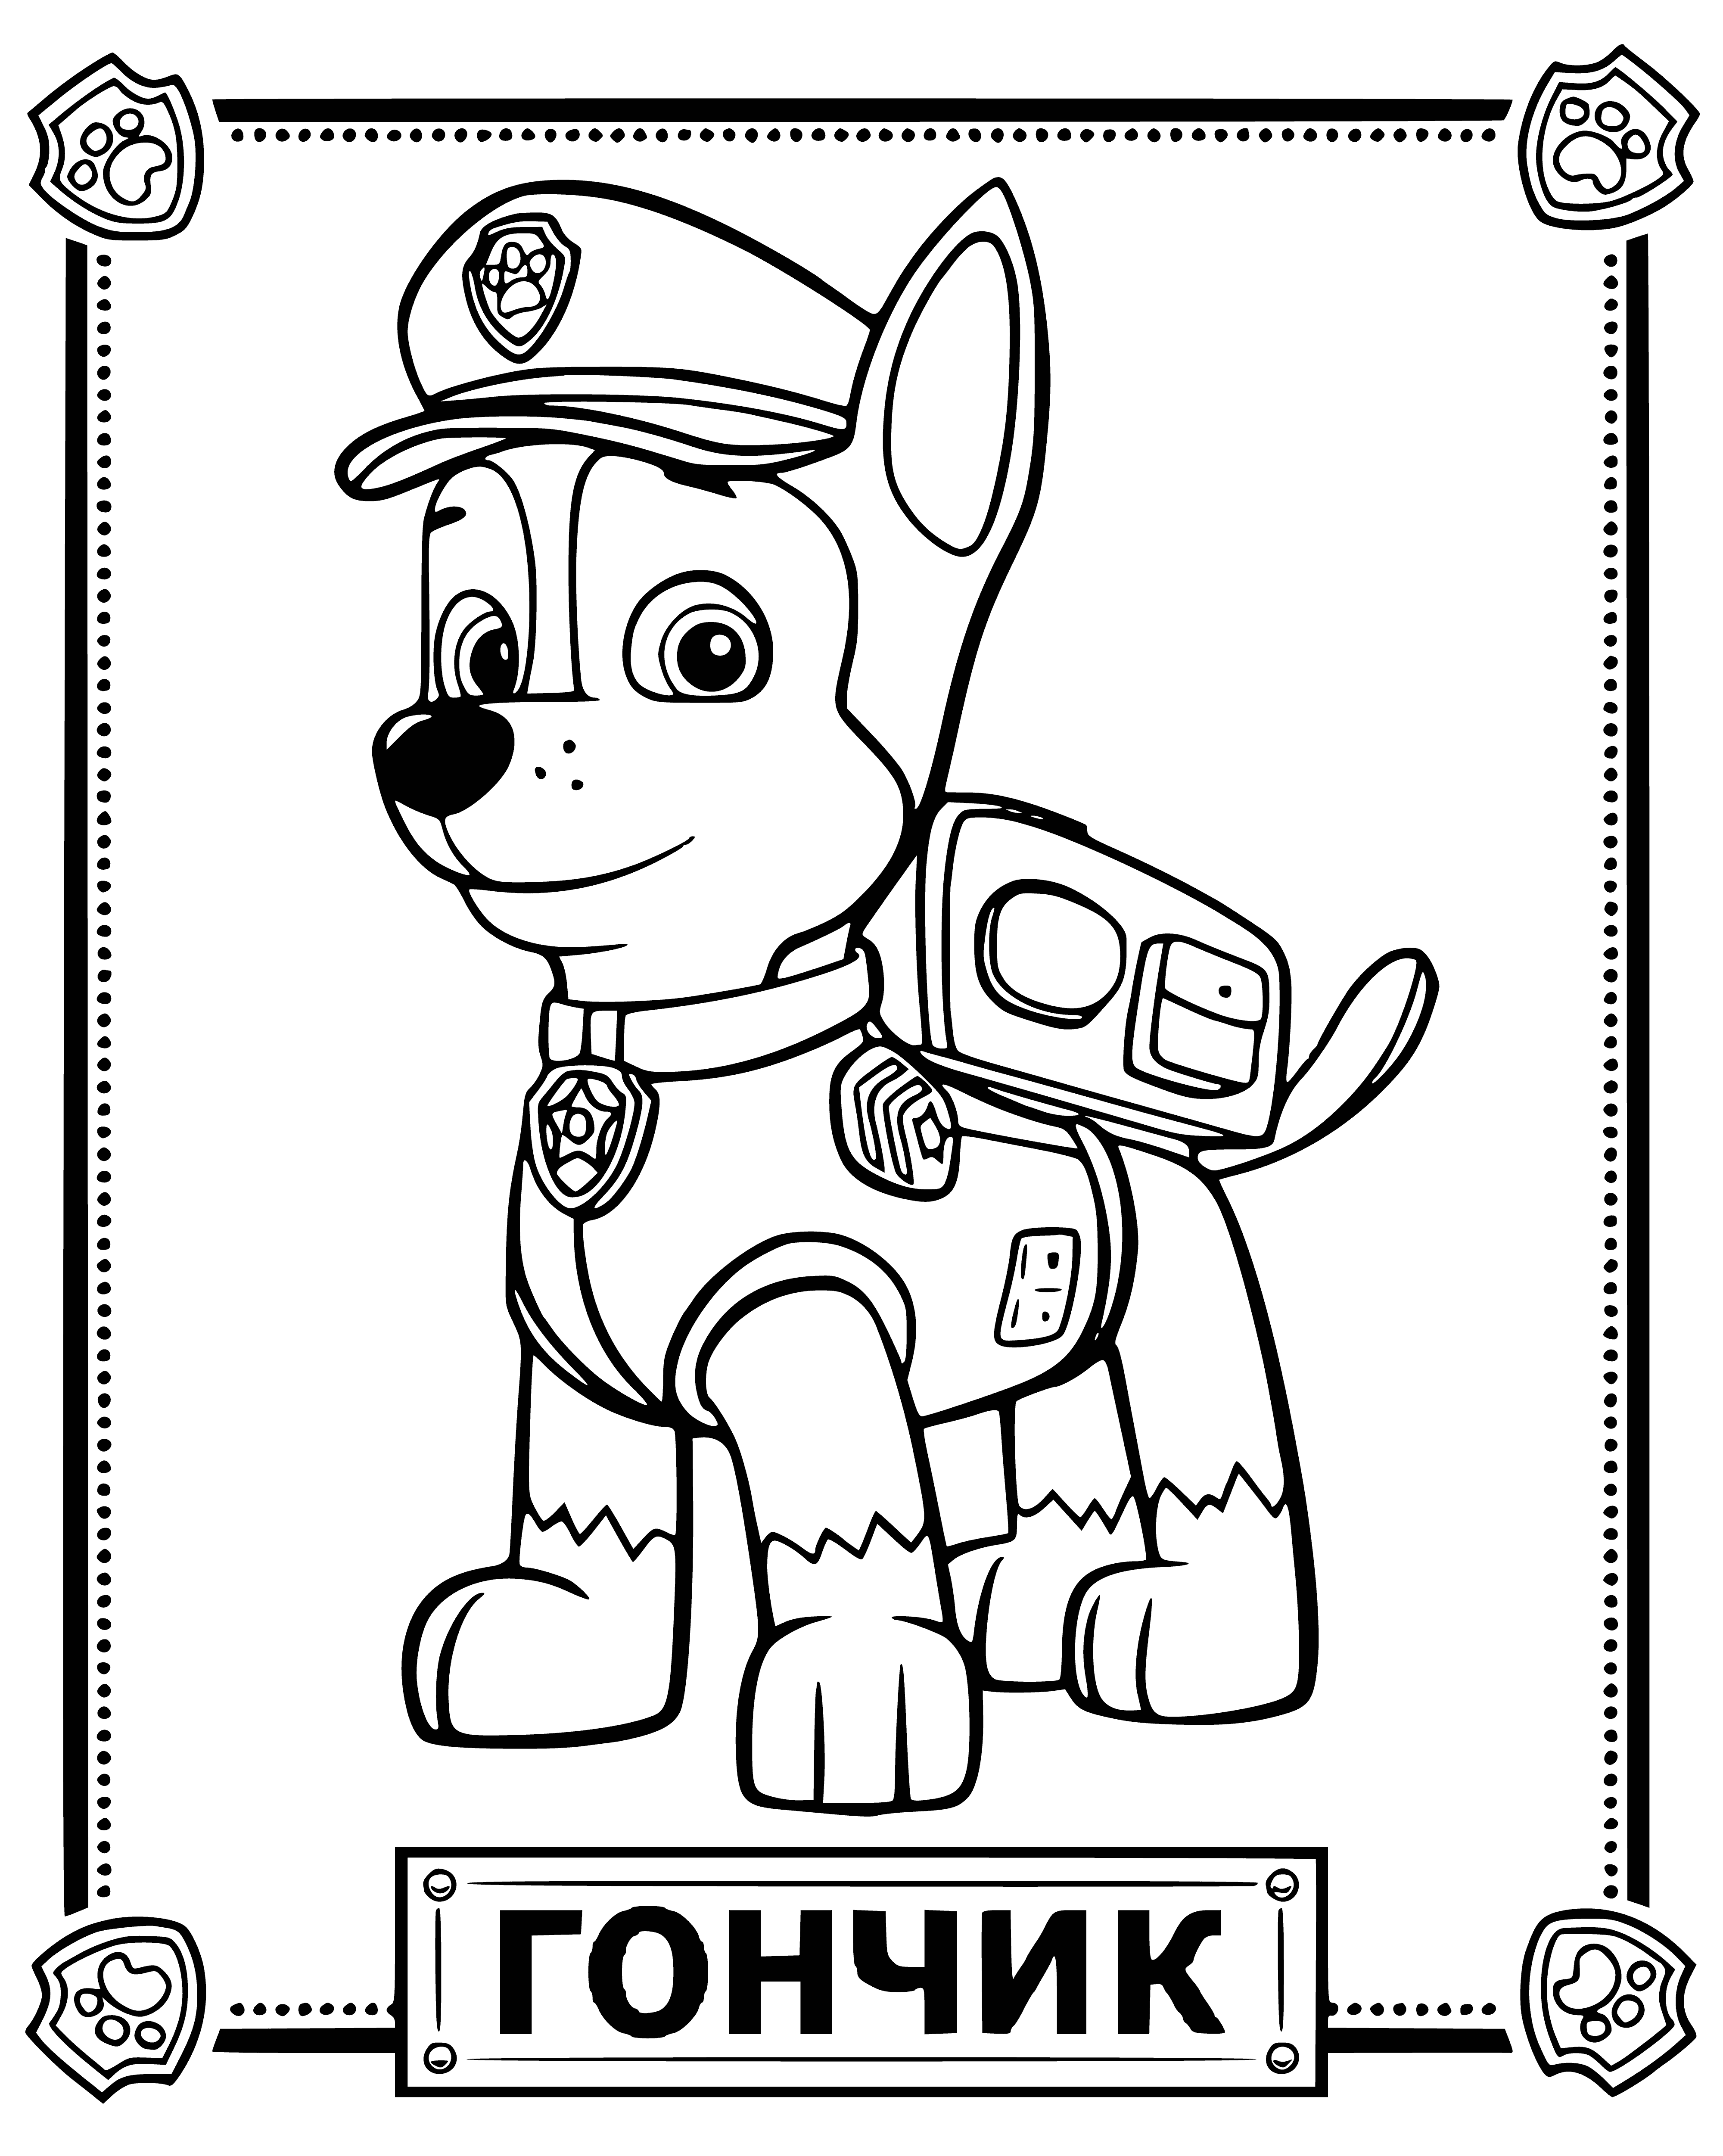 coloring page: PAW Patrol Racer is a police car with blue light, logo & white/blue colour. Ready for adventure! #PAWPatrol #Racer